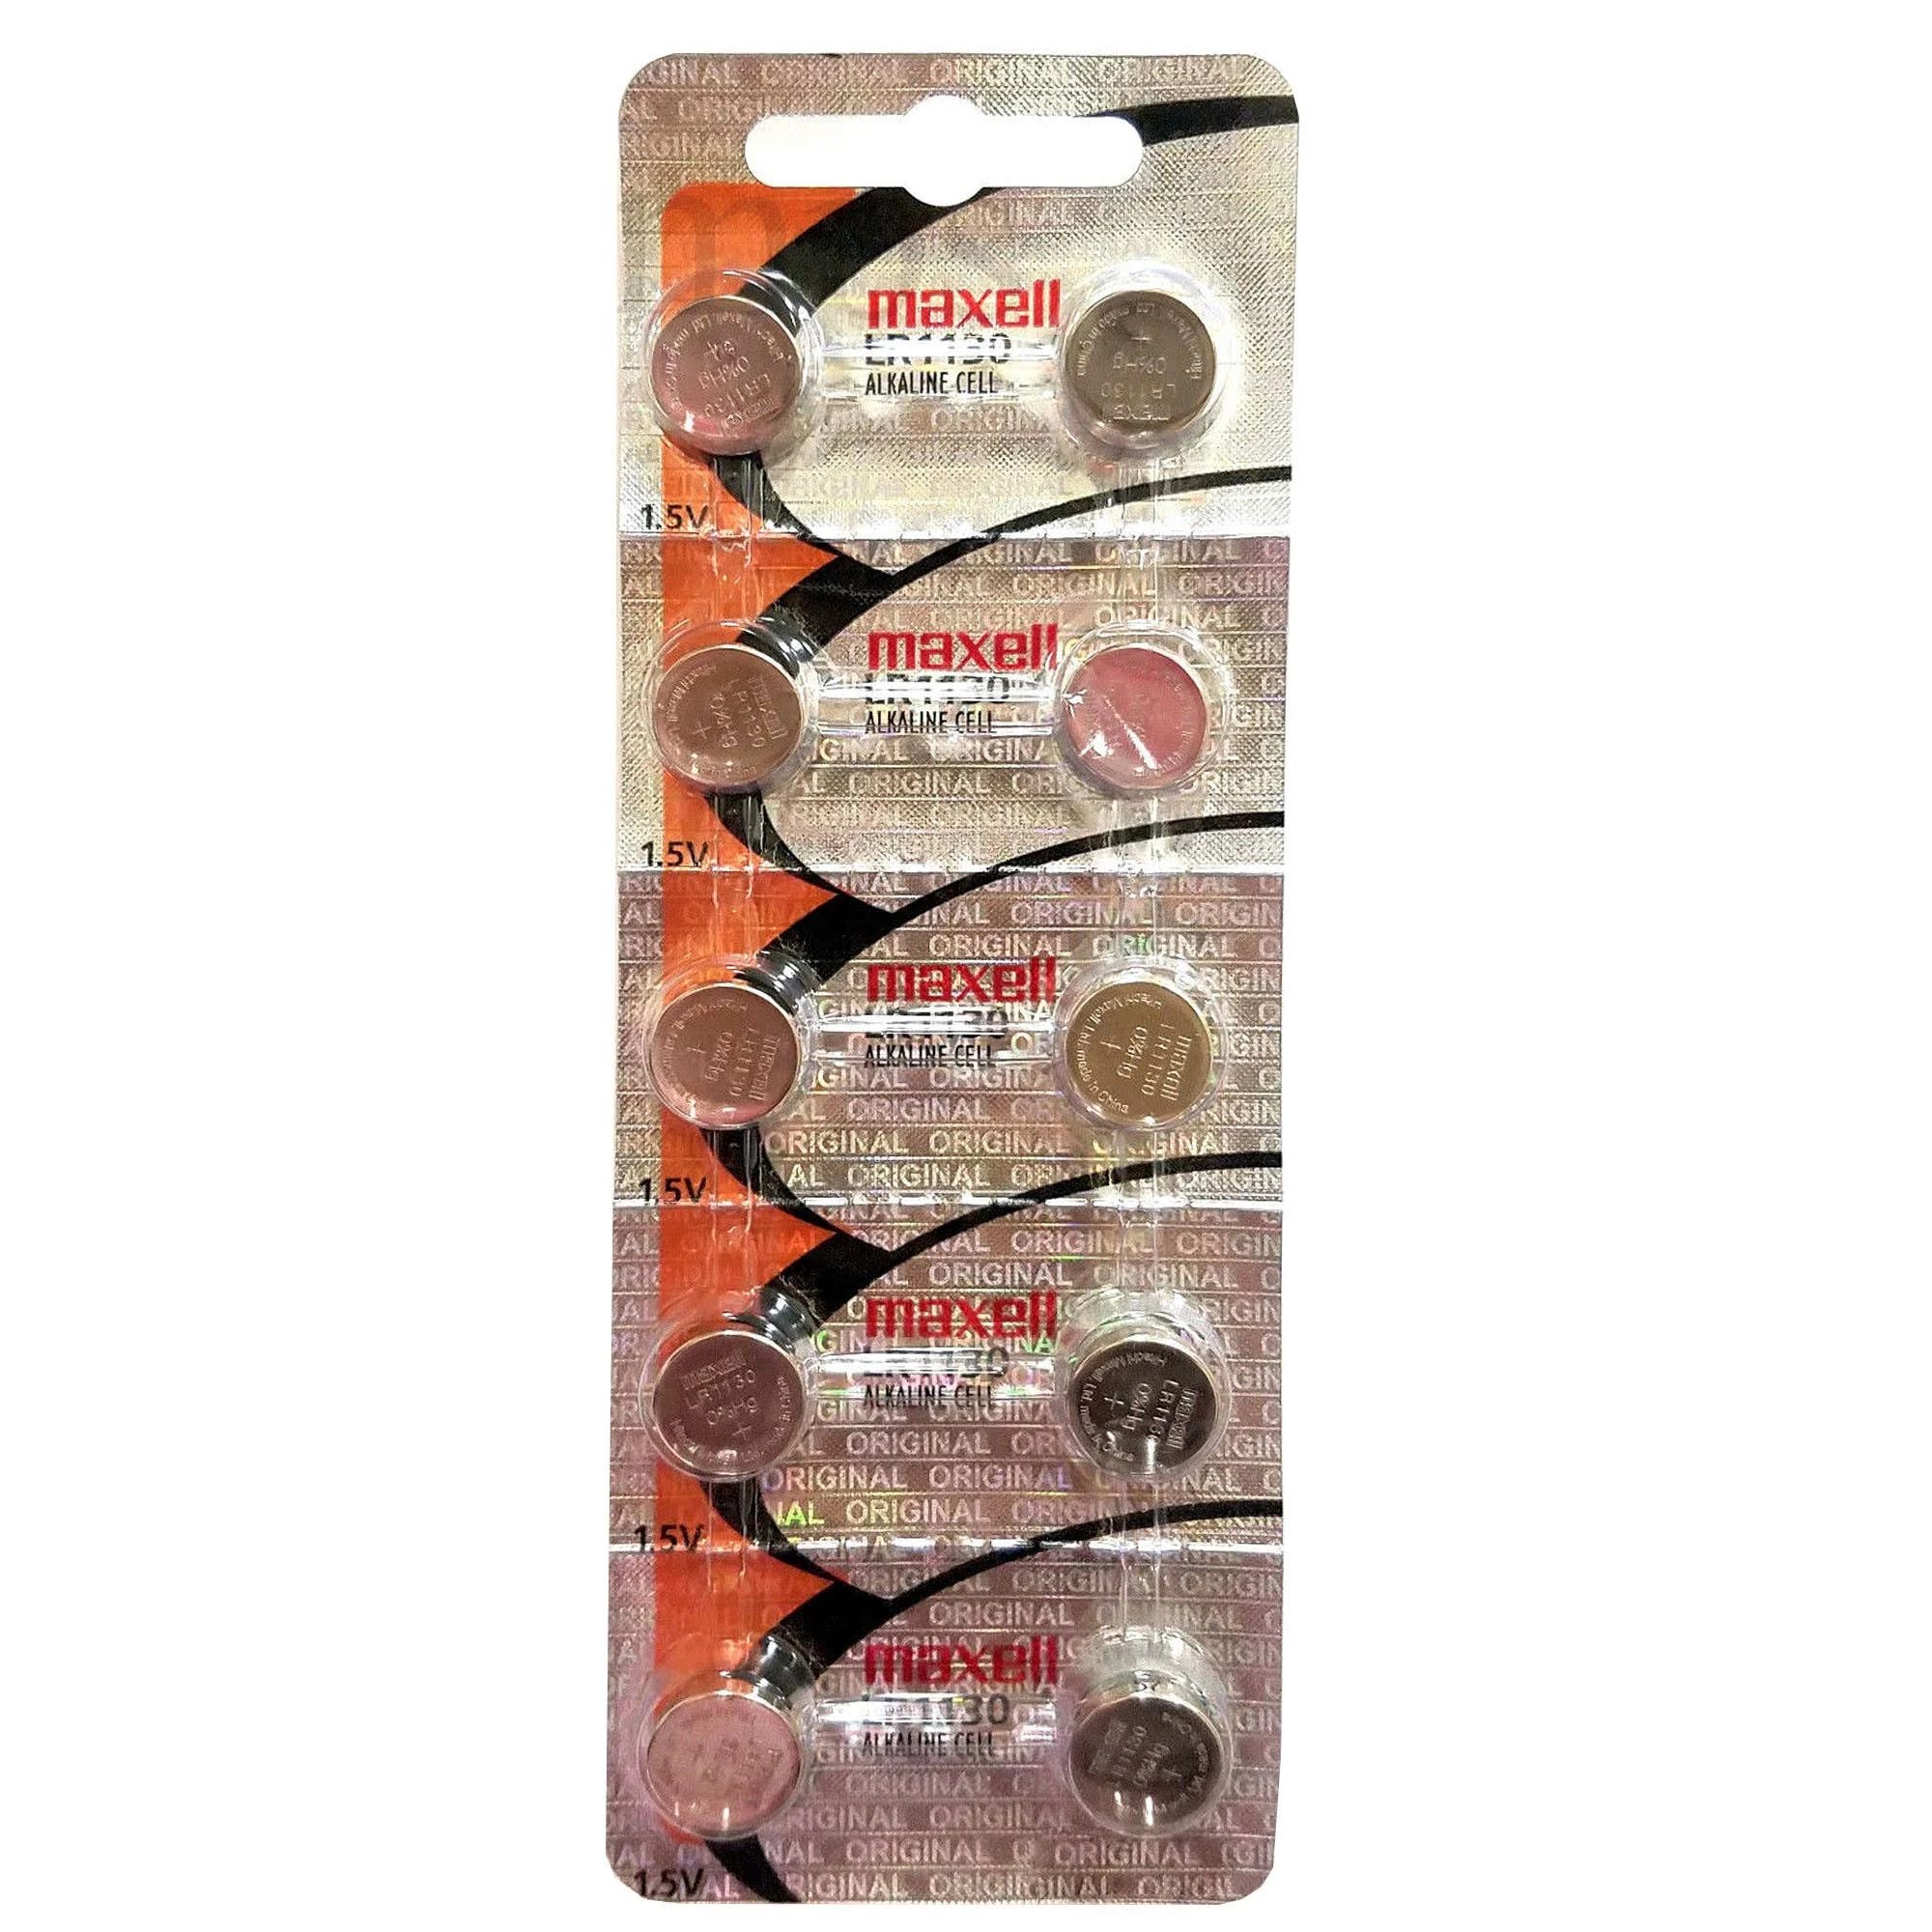 Maxell Alkaline Button Battery Pack | Image